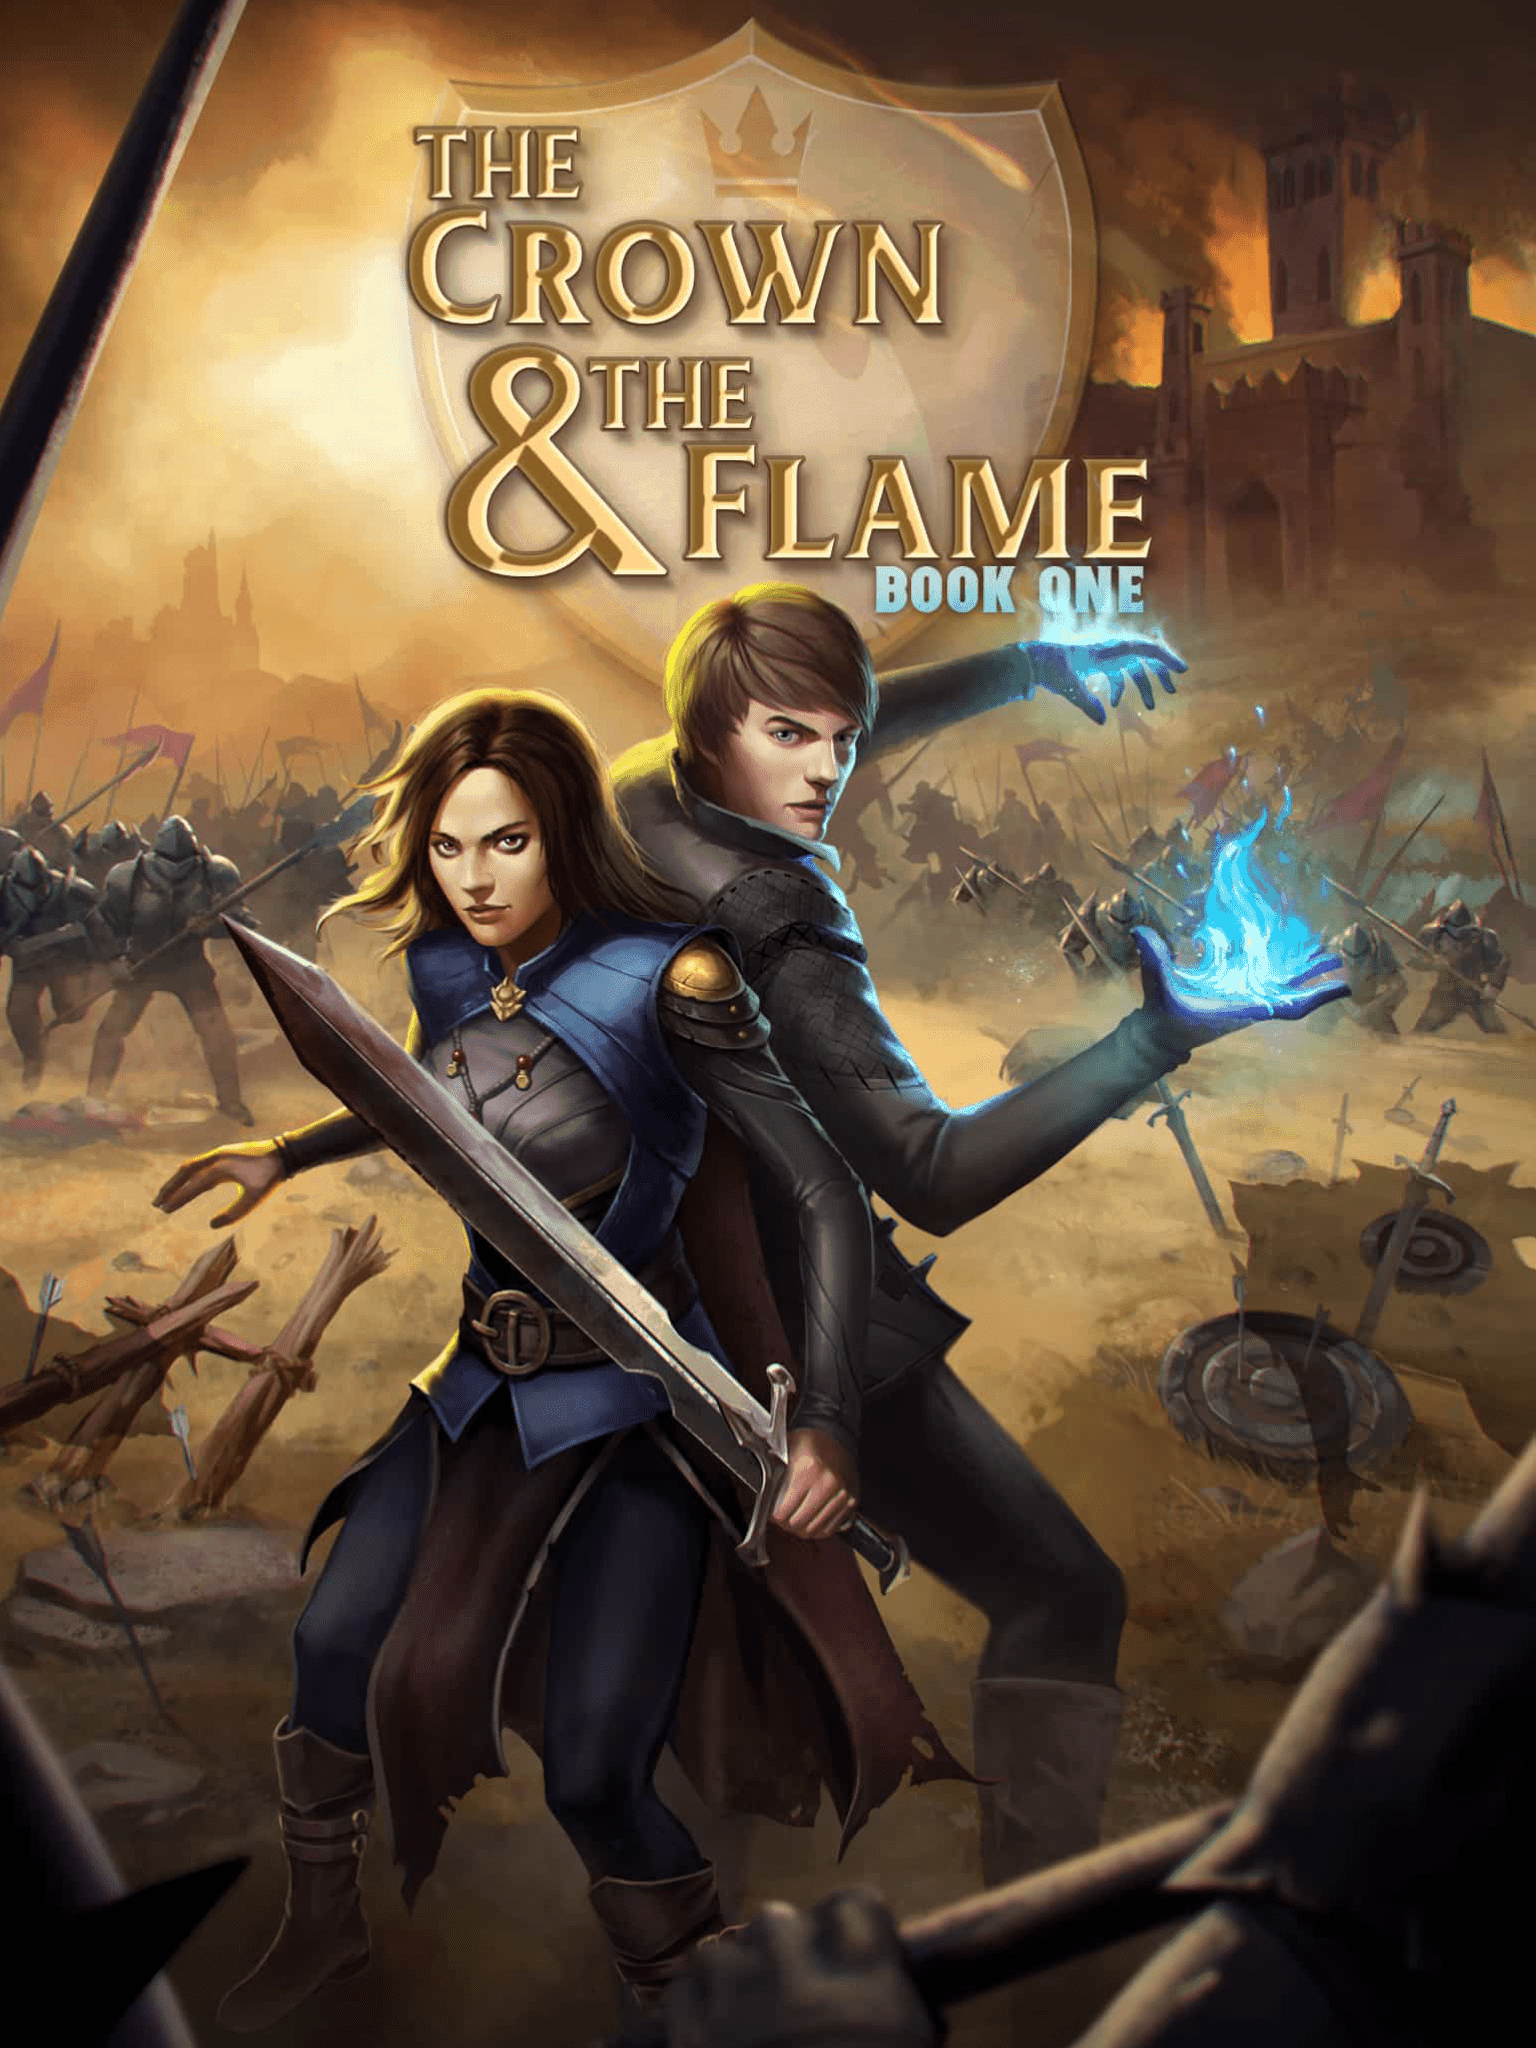 the-crown-the-flame-book-1-choices-choices-stories-you-play-wikia-fandom-powered-by-wikia